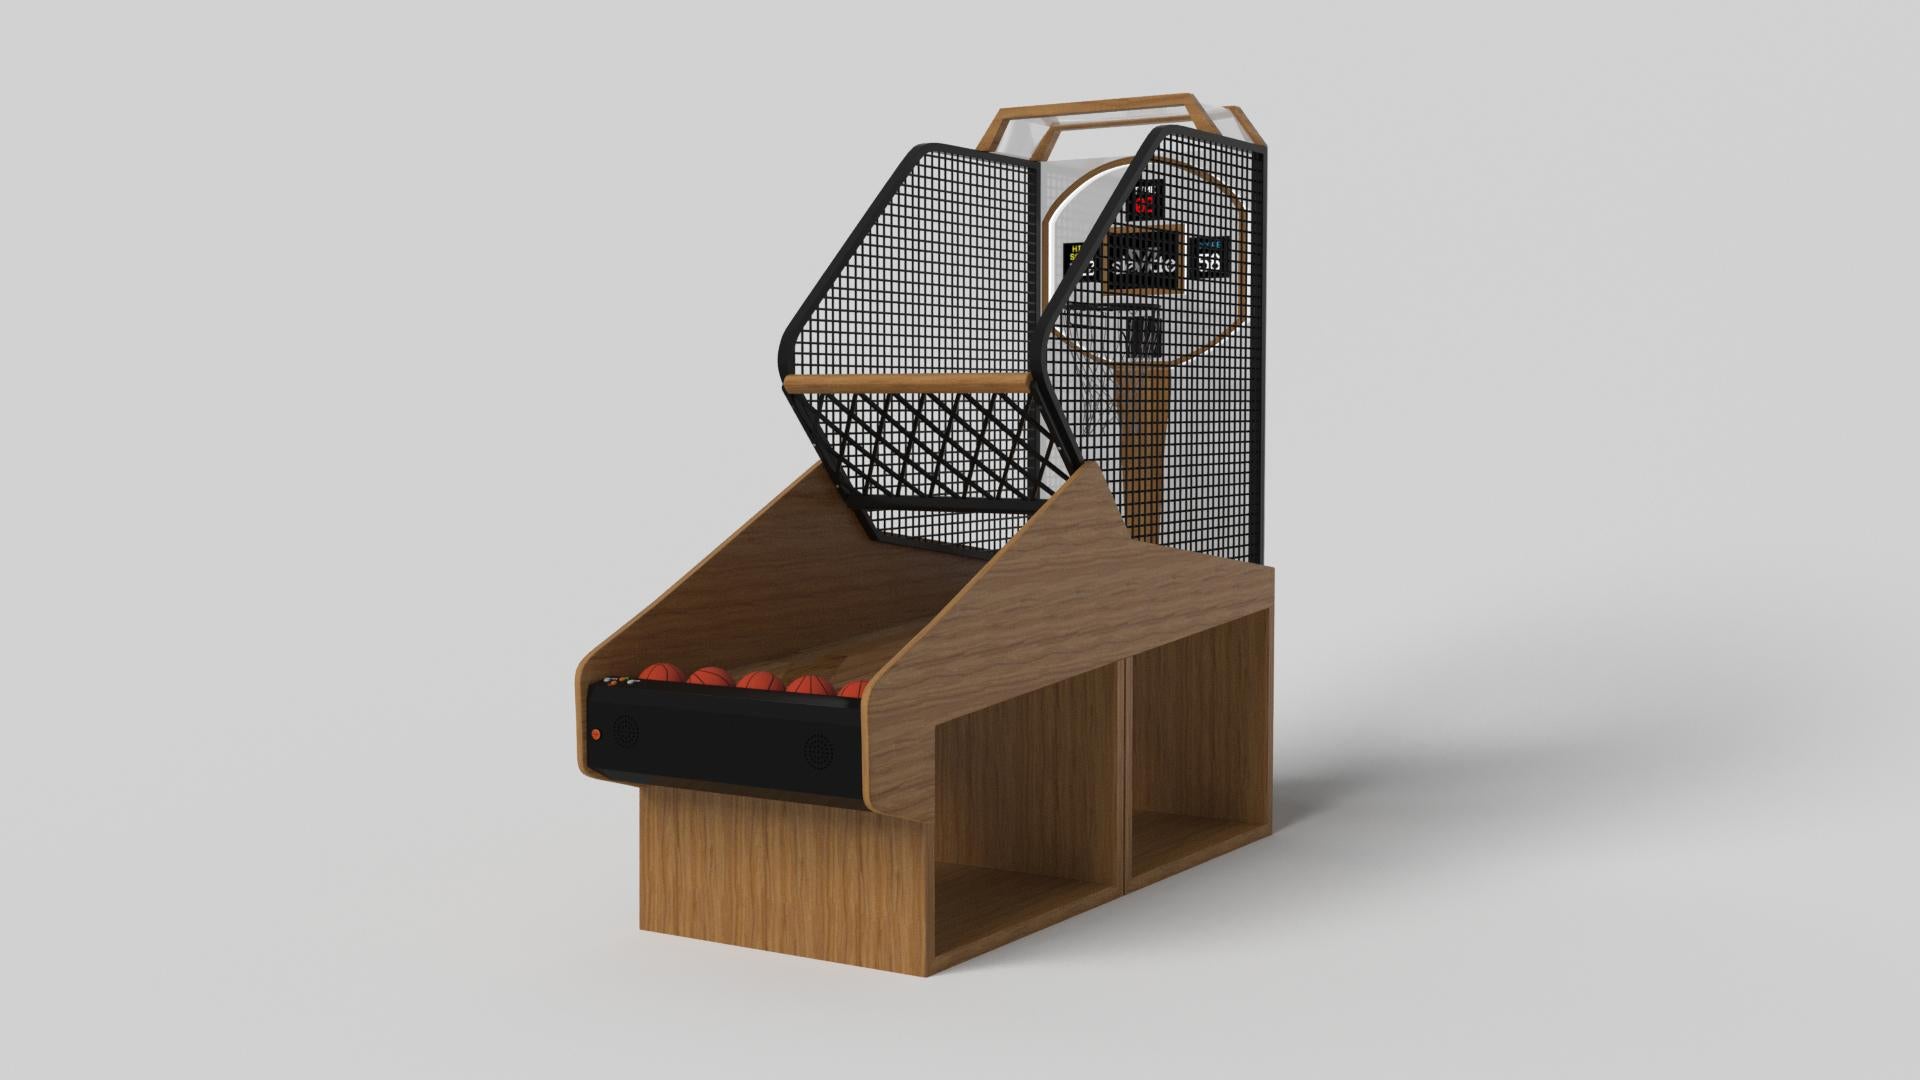 Supported by two rectangular open pedestals as the base, this handcrafted basketball game is modern and minimalistic with its combination of simple, geometric forms. Viewed from the front, the use of negative space is evident; viewed from the side,